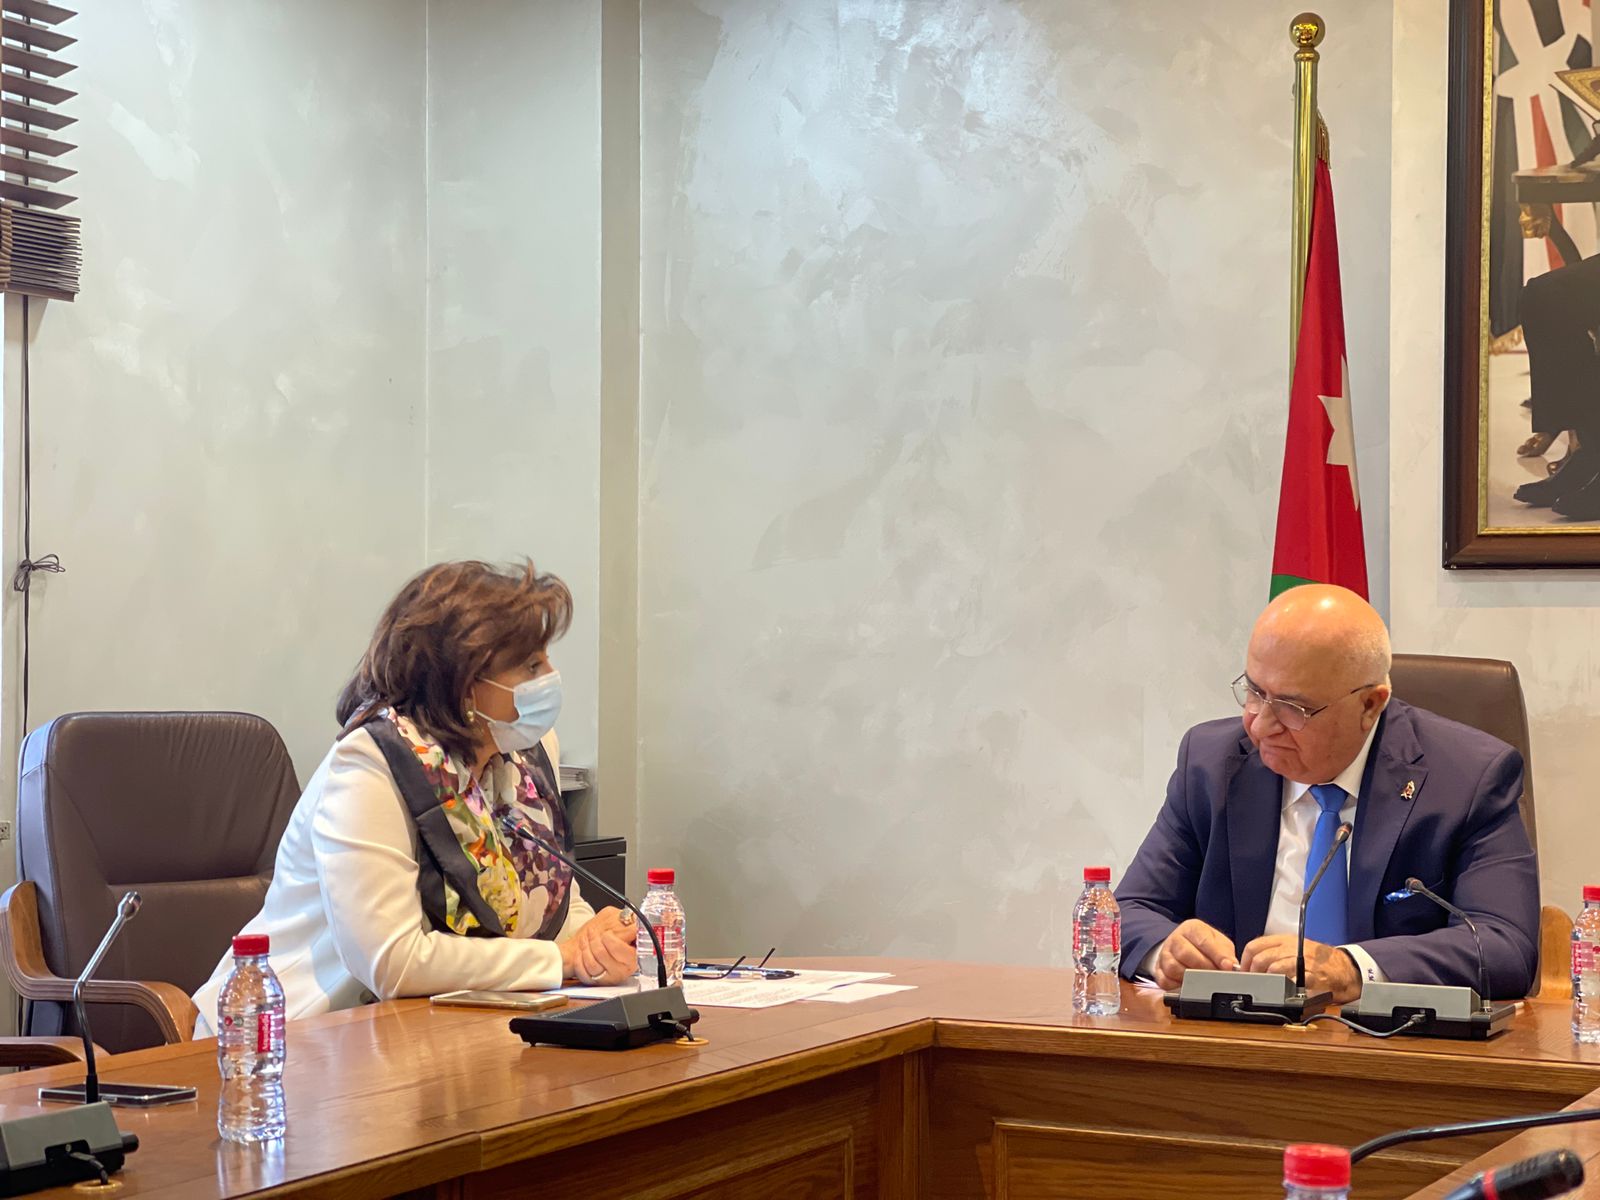 UN Women Executive Director Sima Bahous meets H.E. Eng. Musa Al-Maaytah, Minister of Political and Parliamentary Affairs and Chair of the Inter-Ministerial Committee on Women’s Empowerment of Jordan. Photo: Courtesy of the Ministry of Political and Parliamentary Affairs.